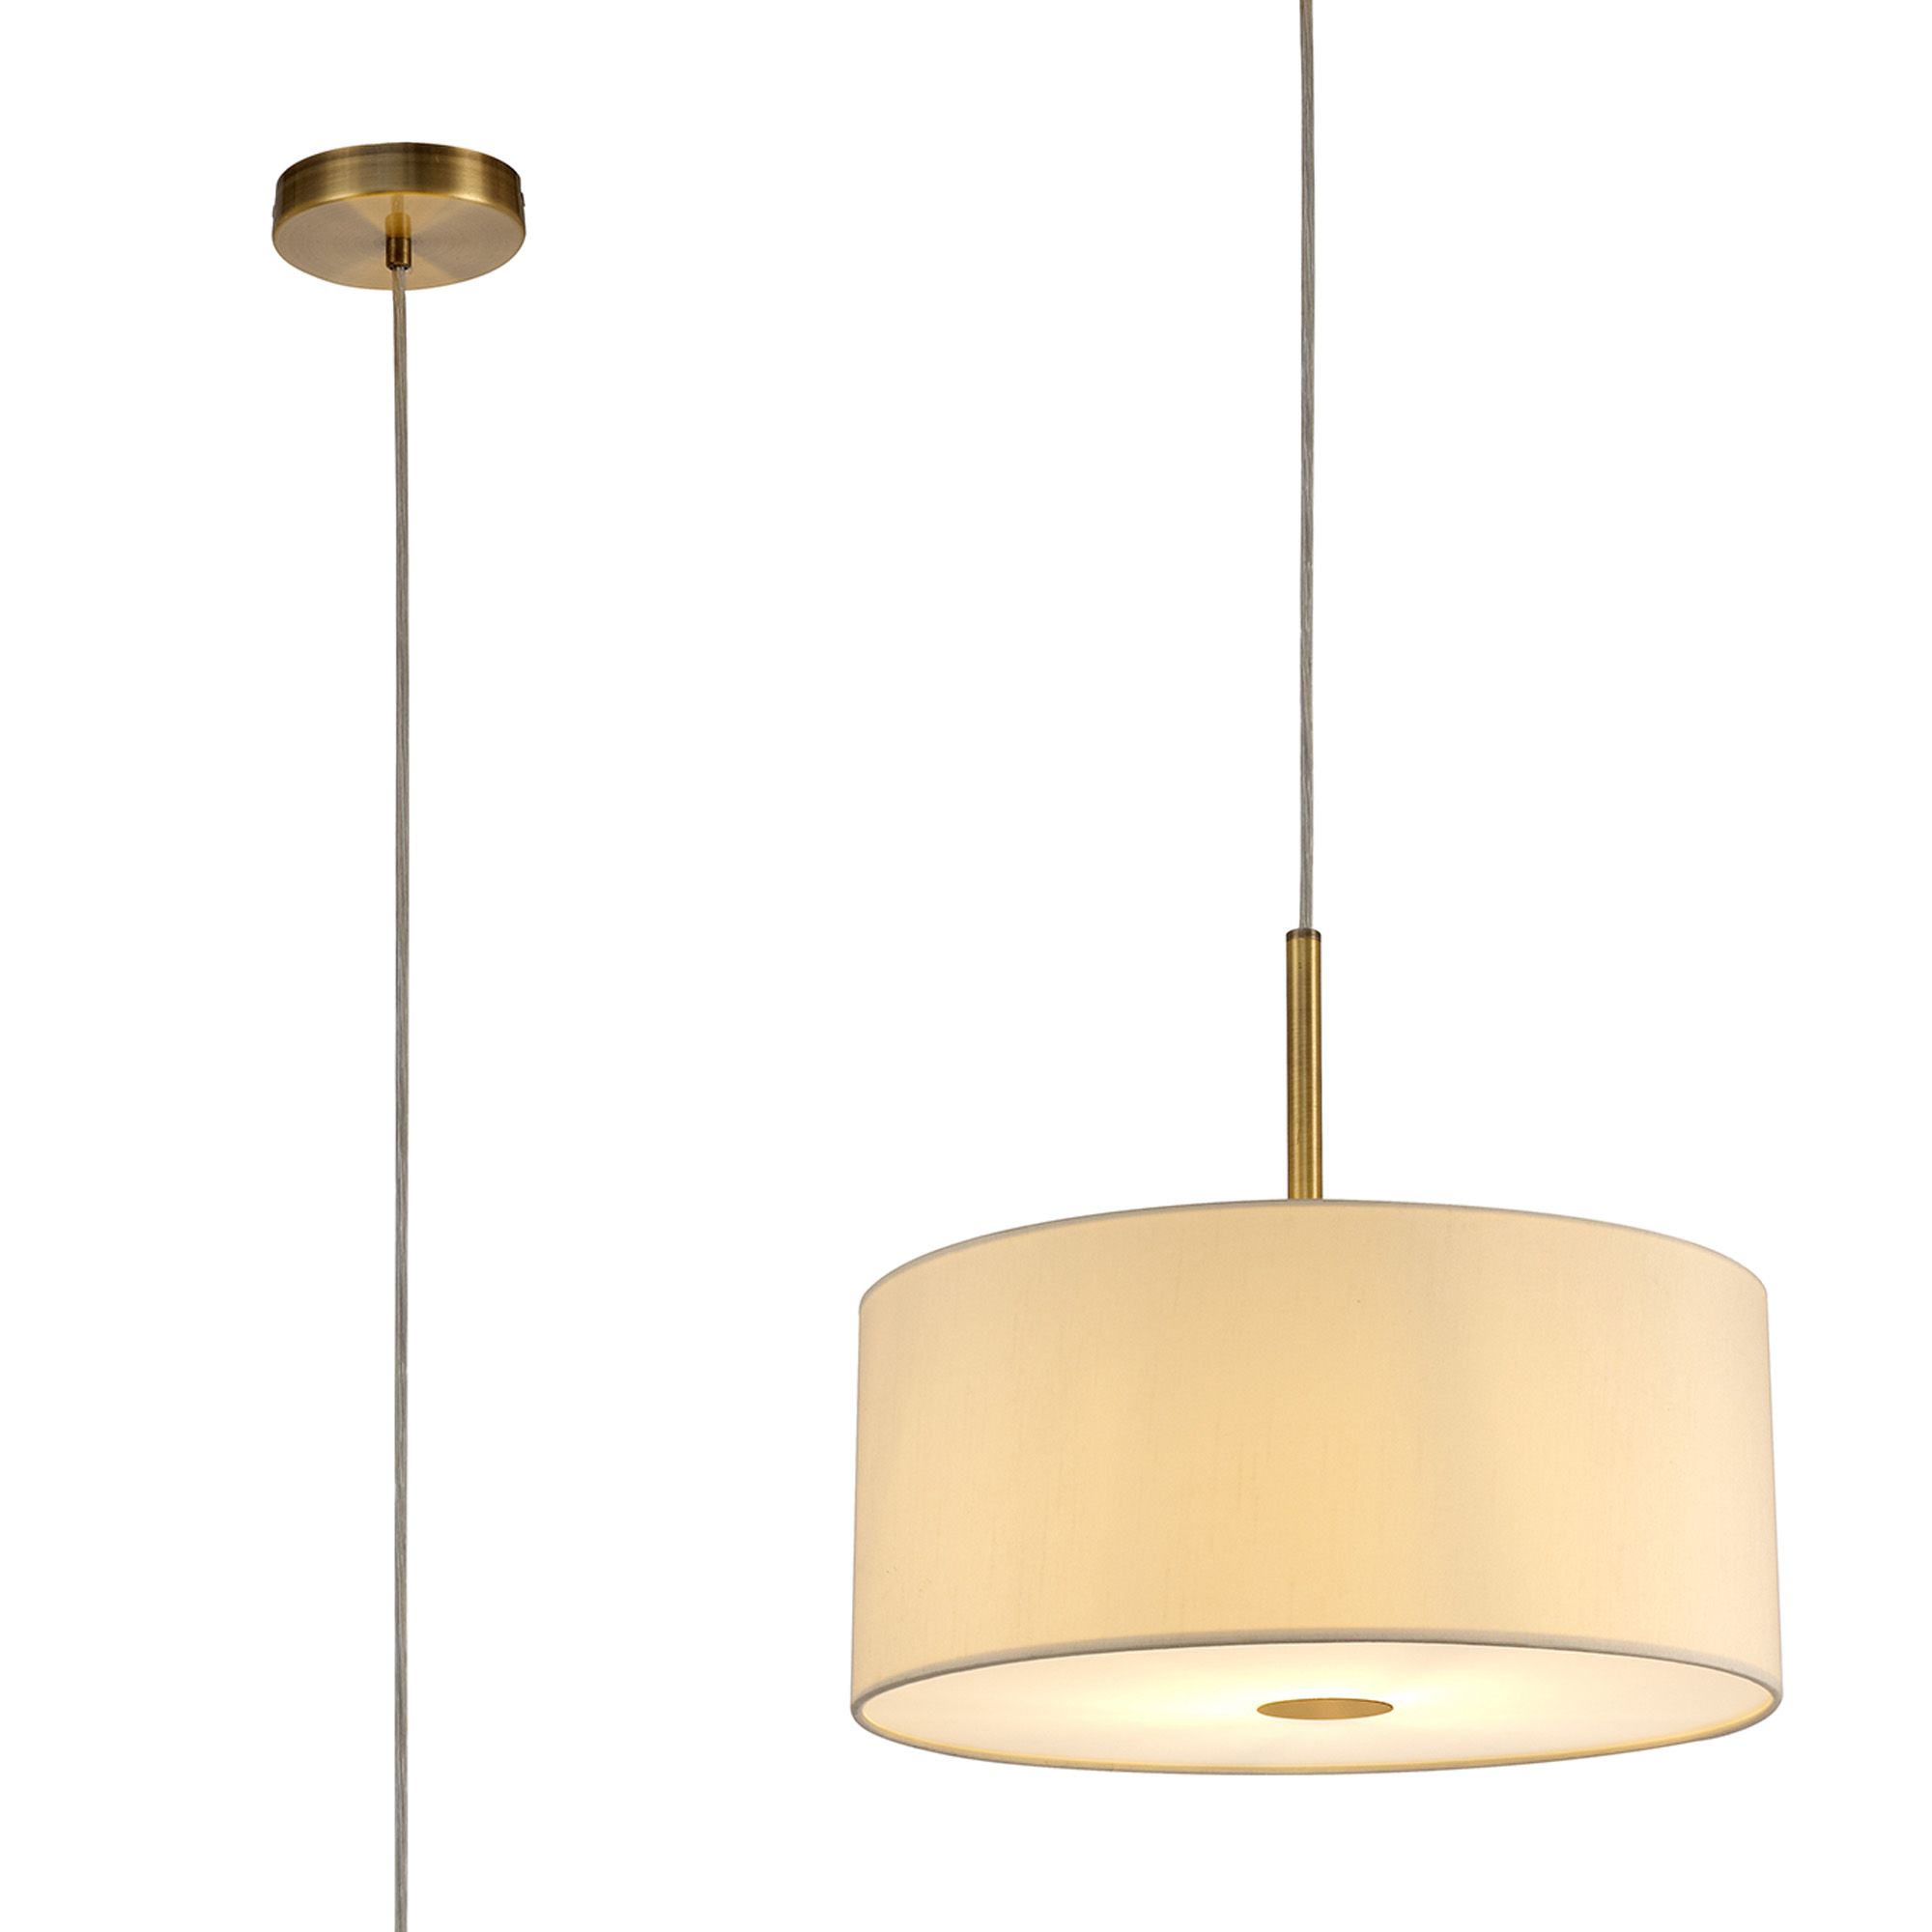 DK0215  Baymont 40cm Pendant 1 Light Antique Brass, Ivory Pearl, Frosted Diffuser